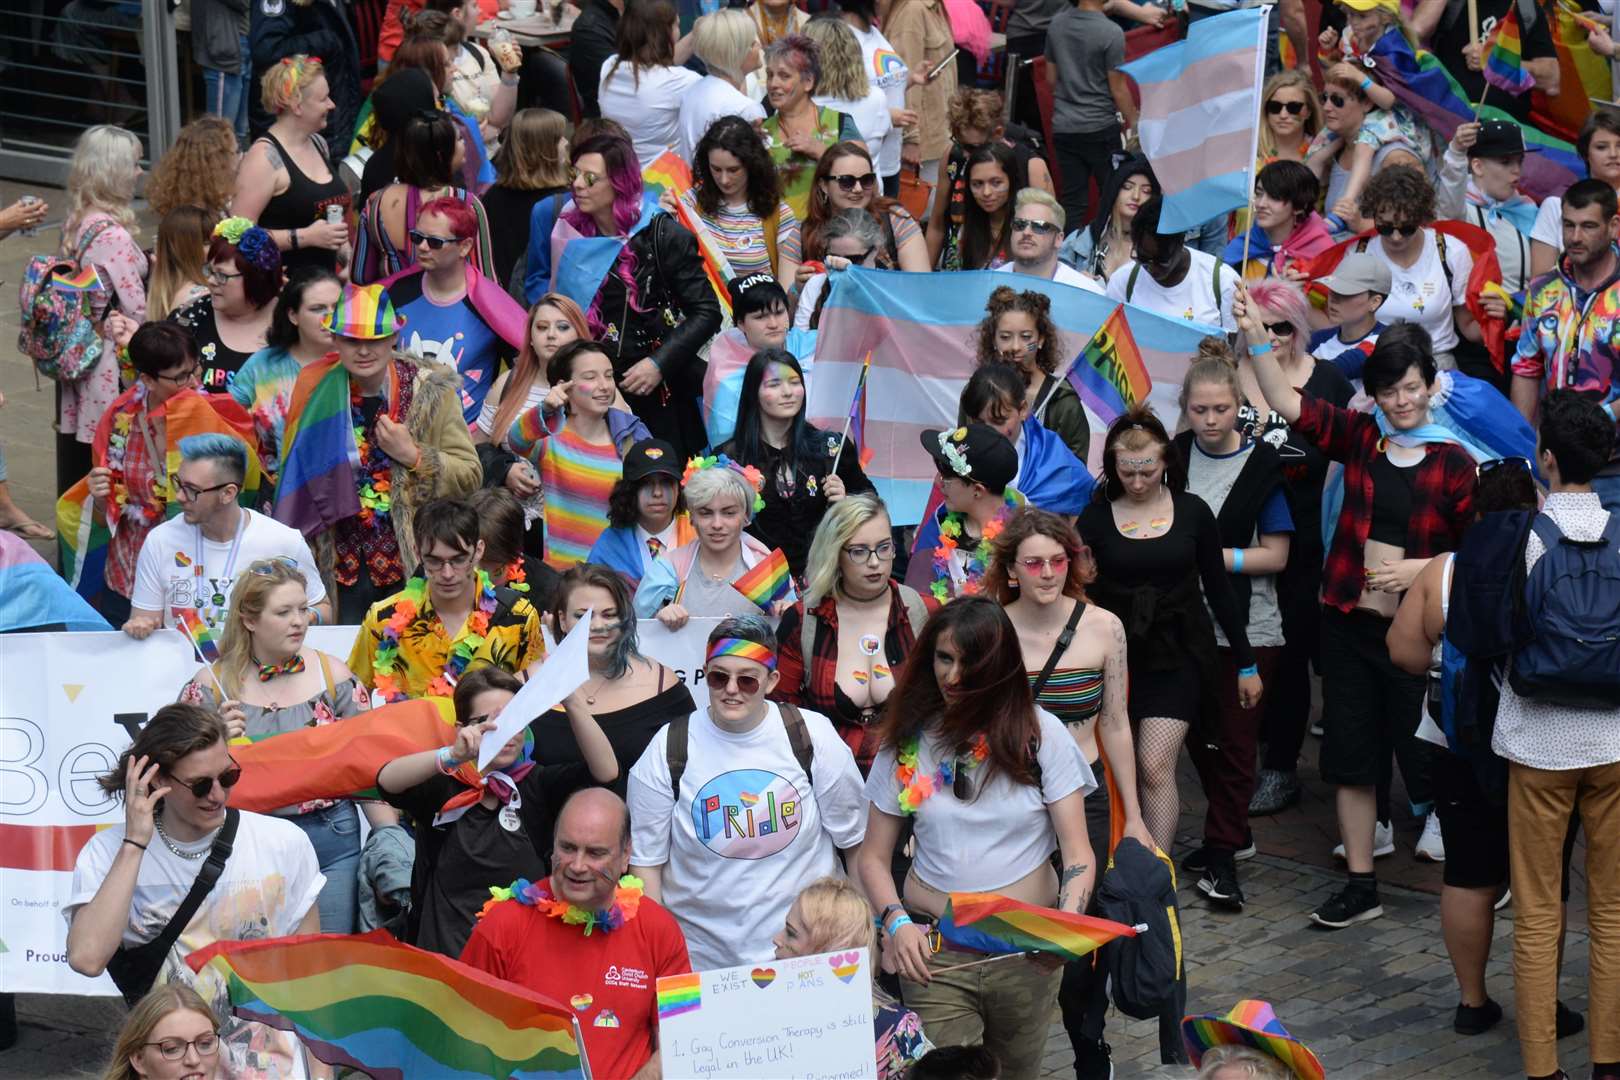 Organisers have announced Canterbury Pride will go ahead in September